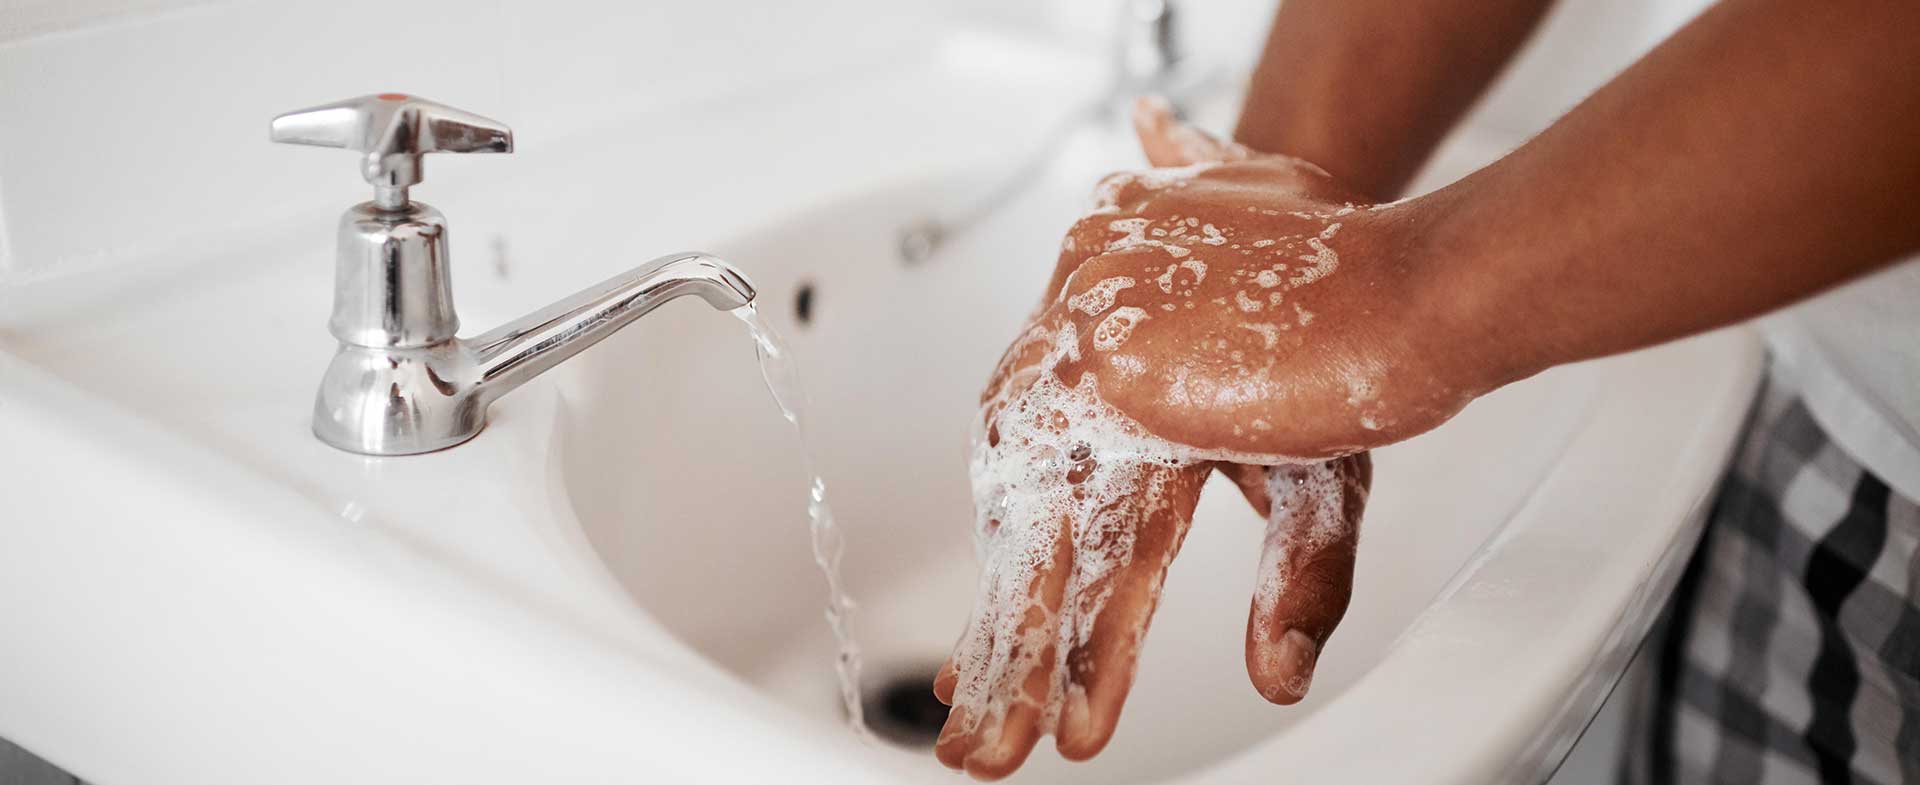 Worried About The Spread Of Viruses? Wash Your Hands